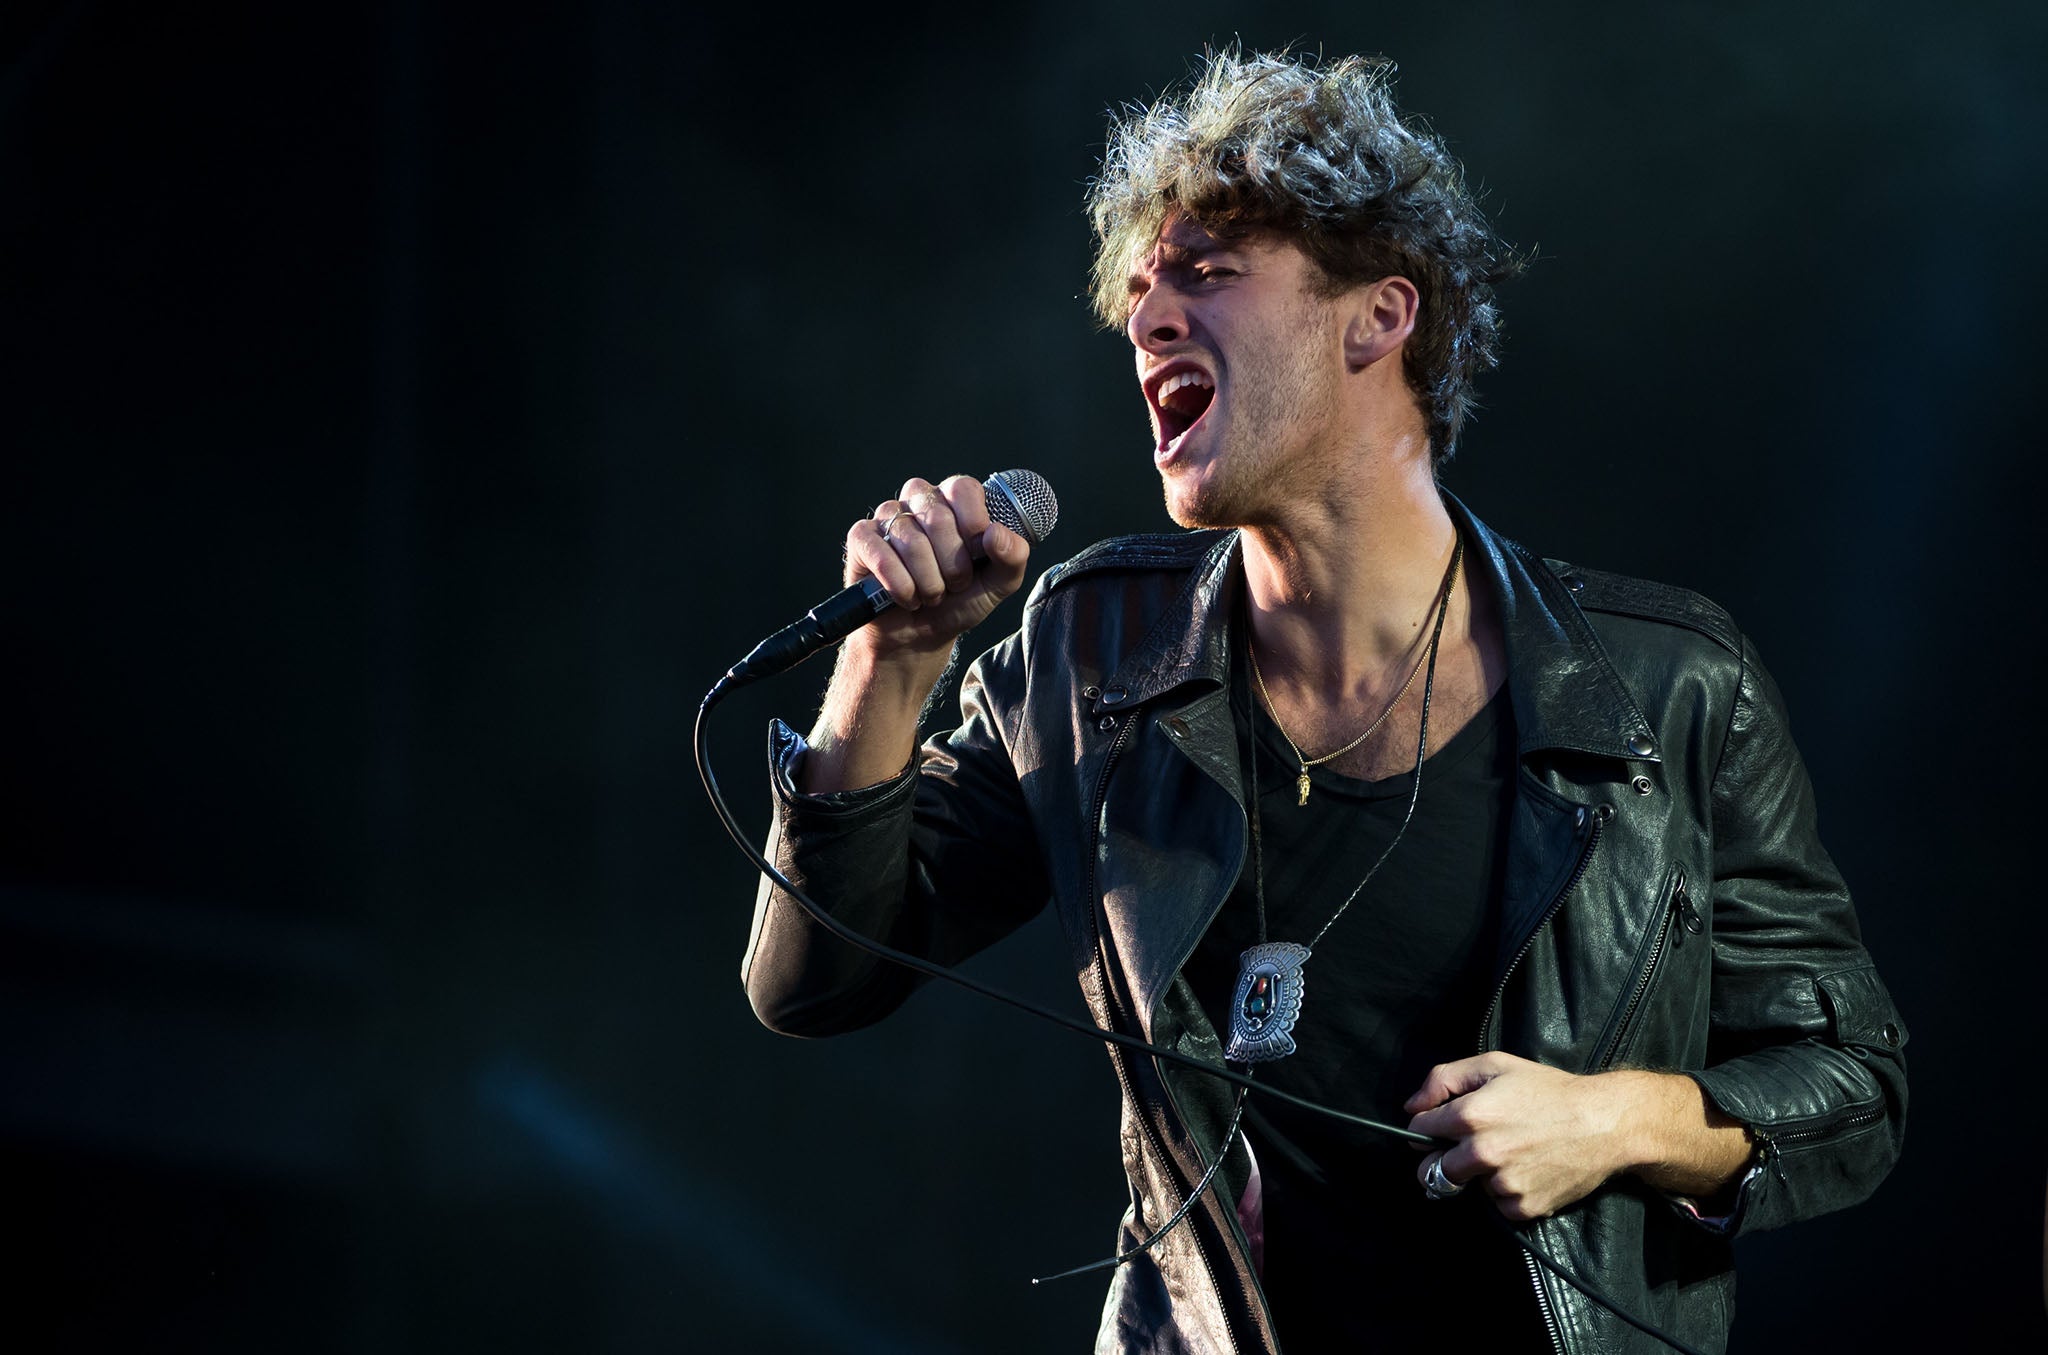 Throaty singer: Paolo Nutini has cancelled shows after contracting tonsillitis